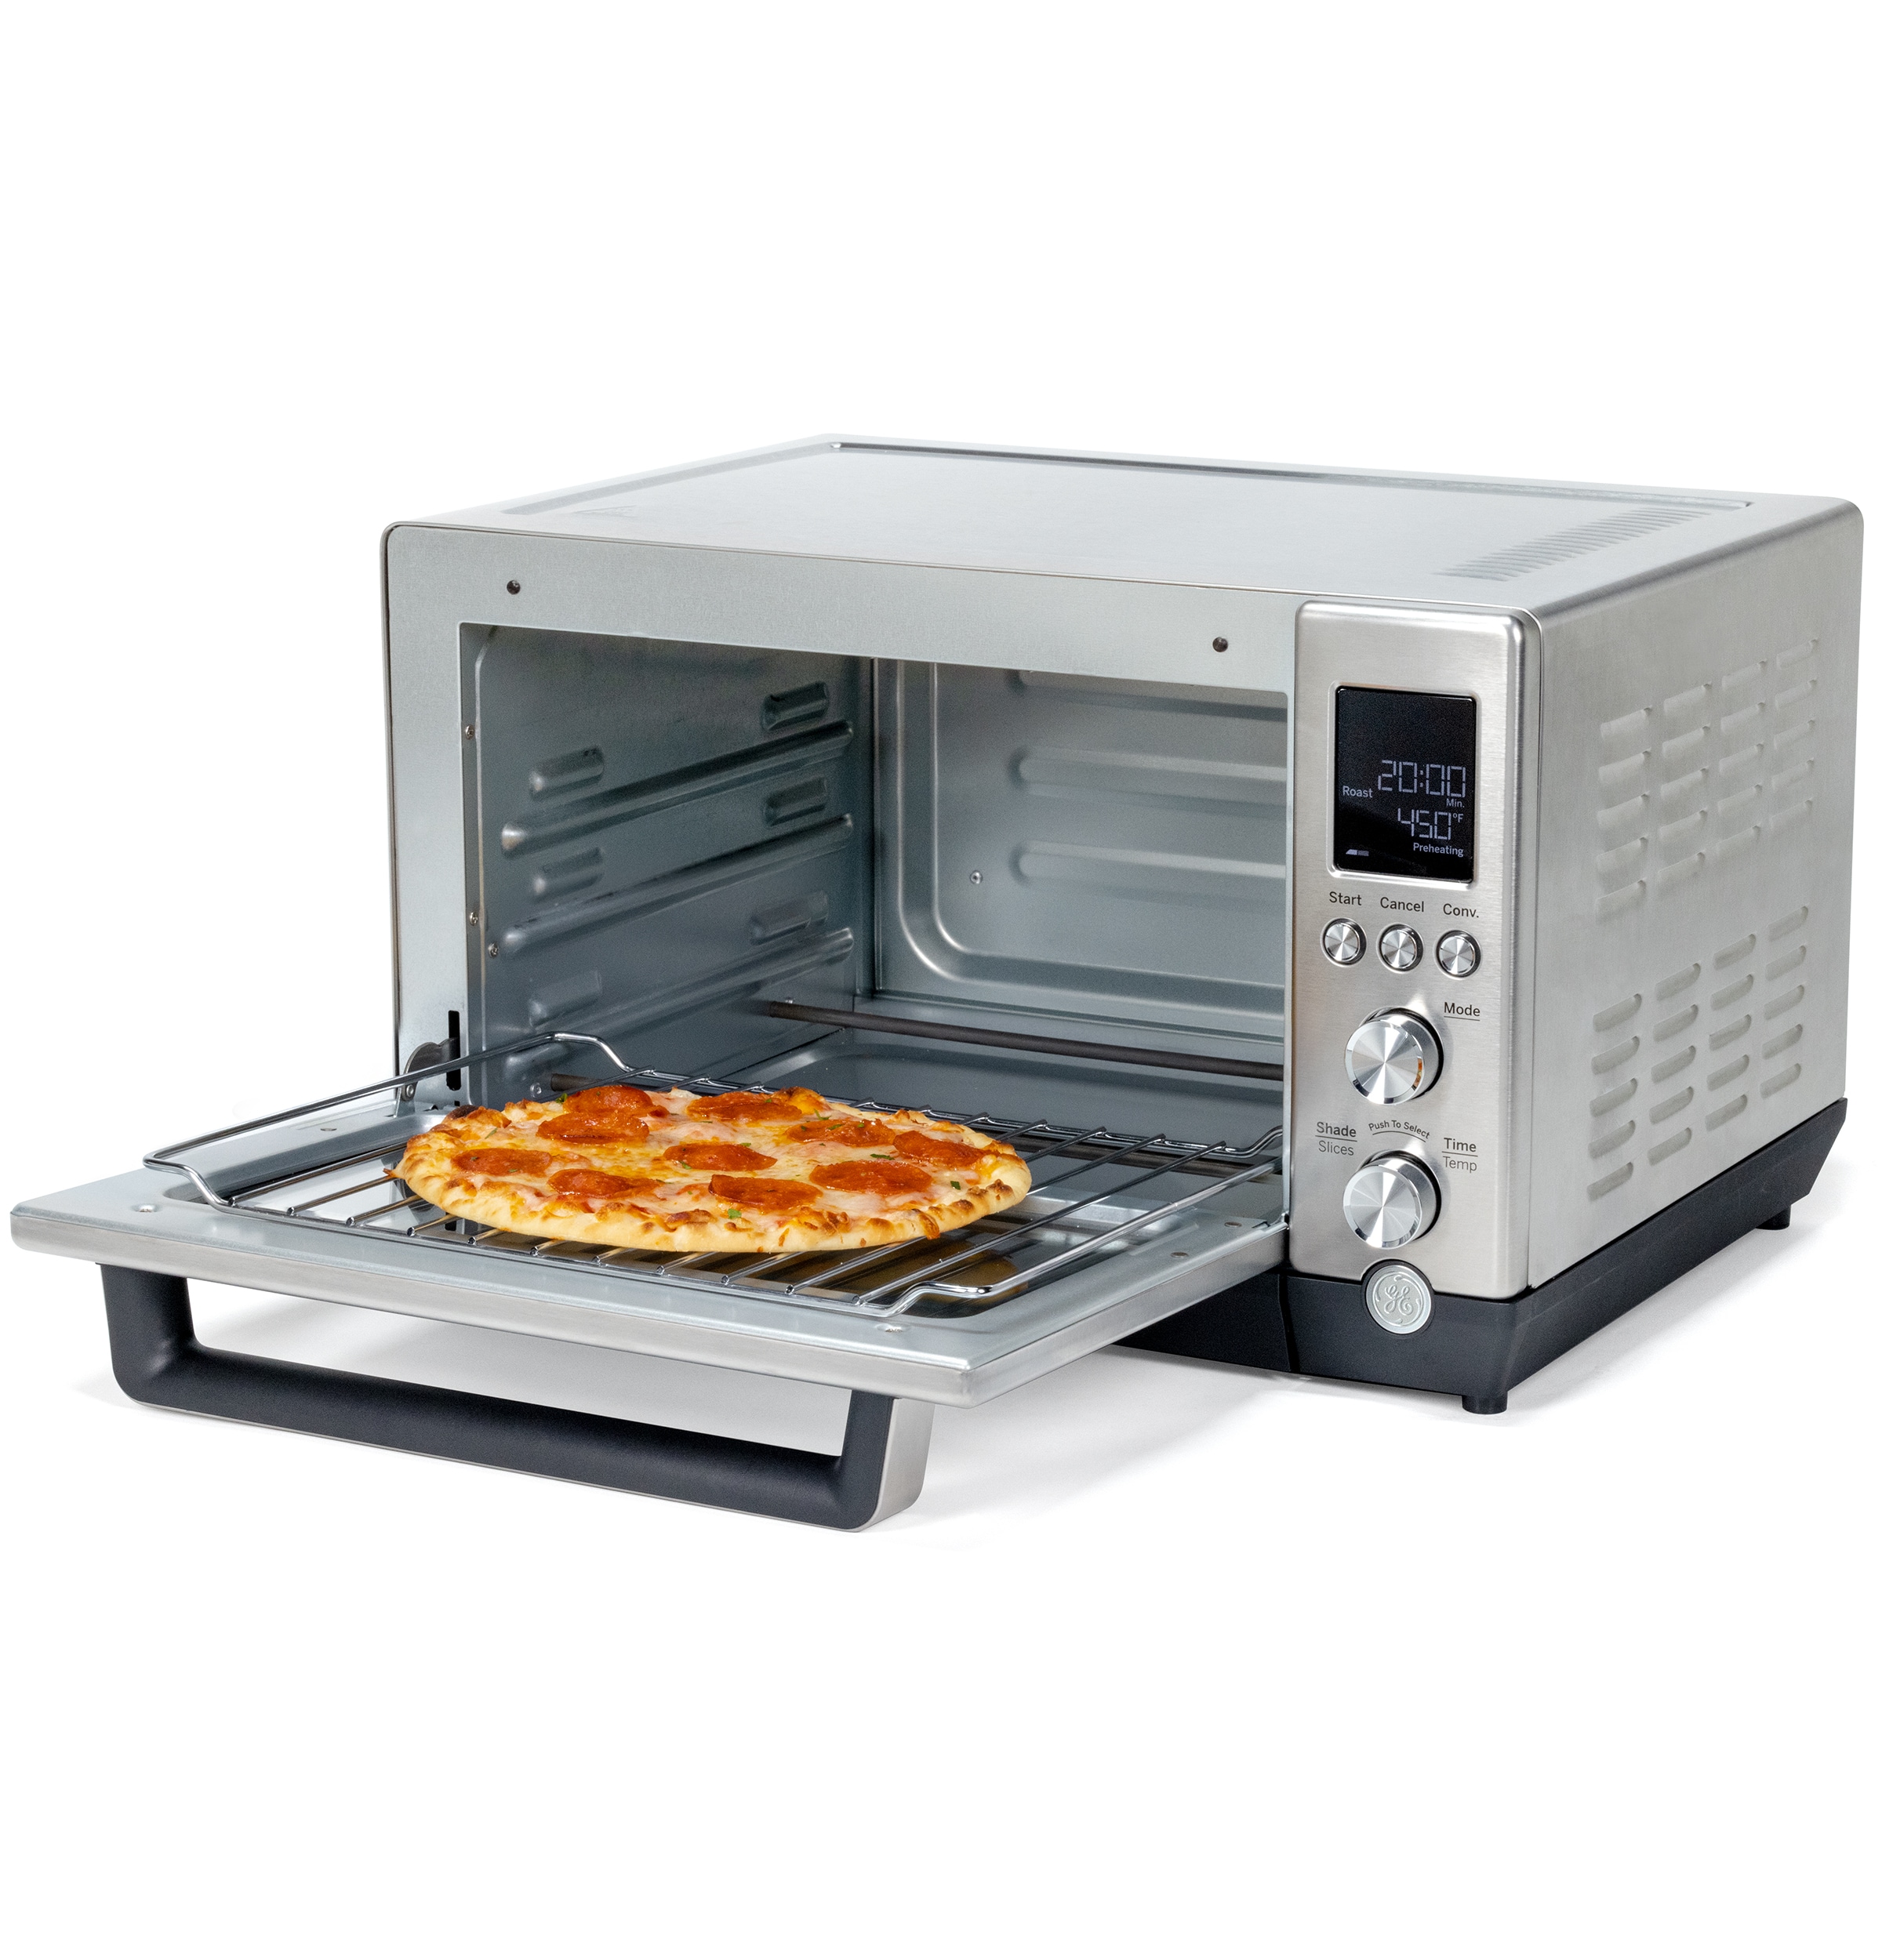 GE 6-Slice Convection Toaster Oven with Rotisserie 168947 Reviews –